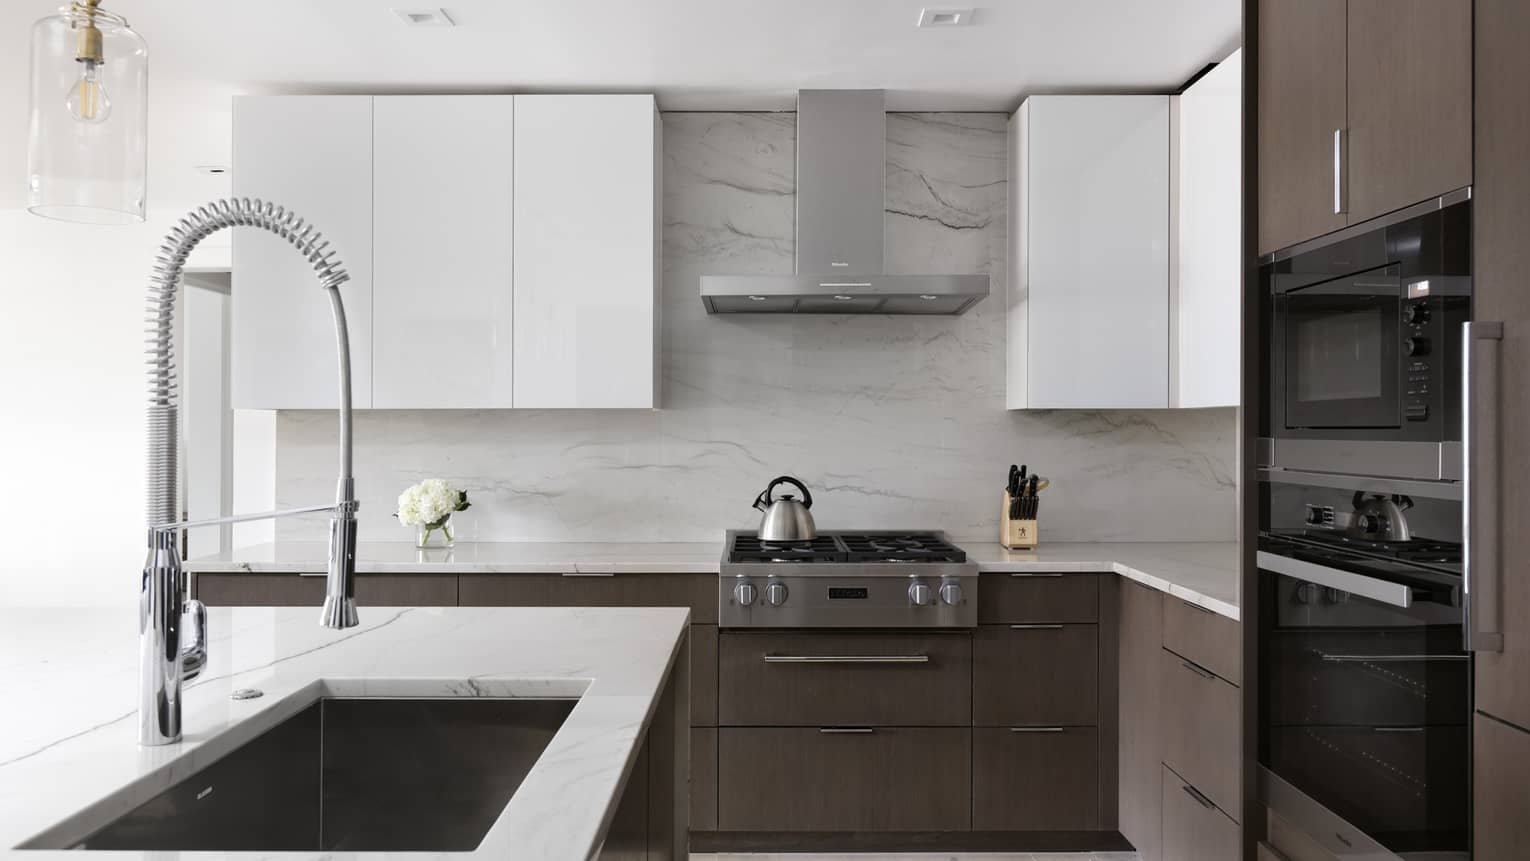 Kitchen with white cupboards and white marble countertops, dark wood lower cabinets